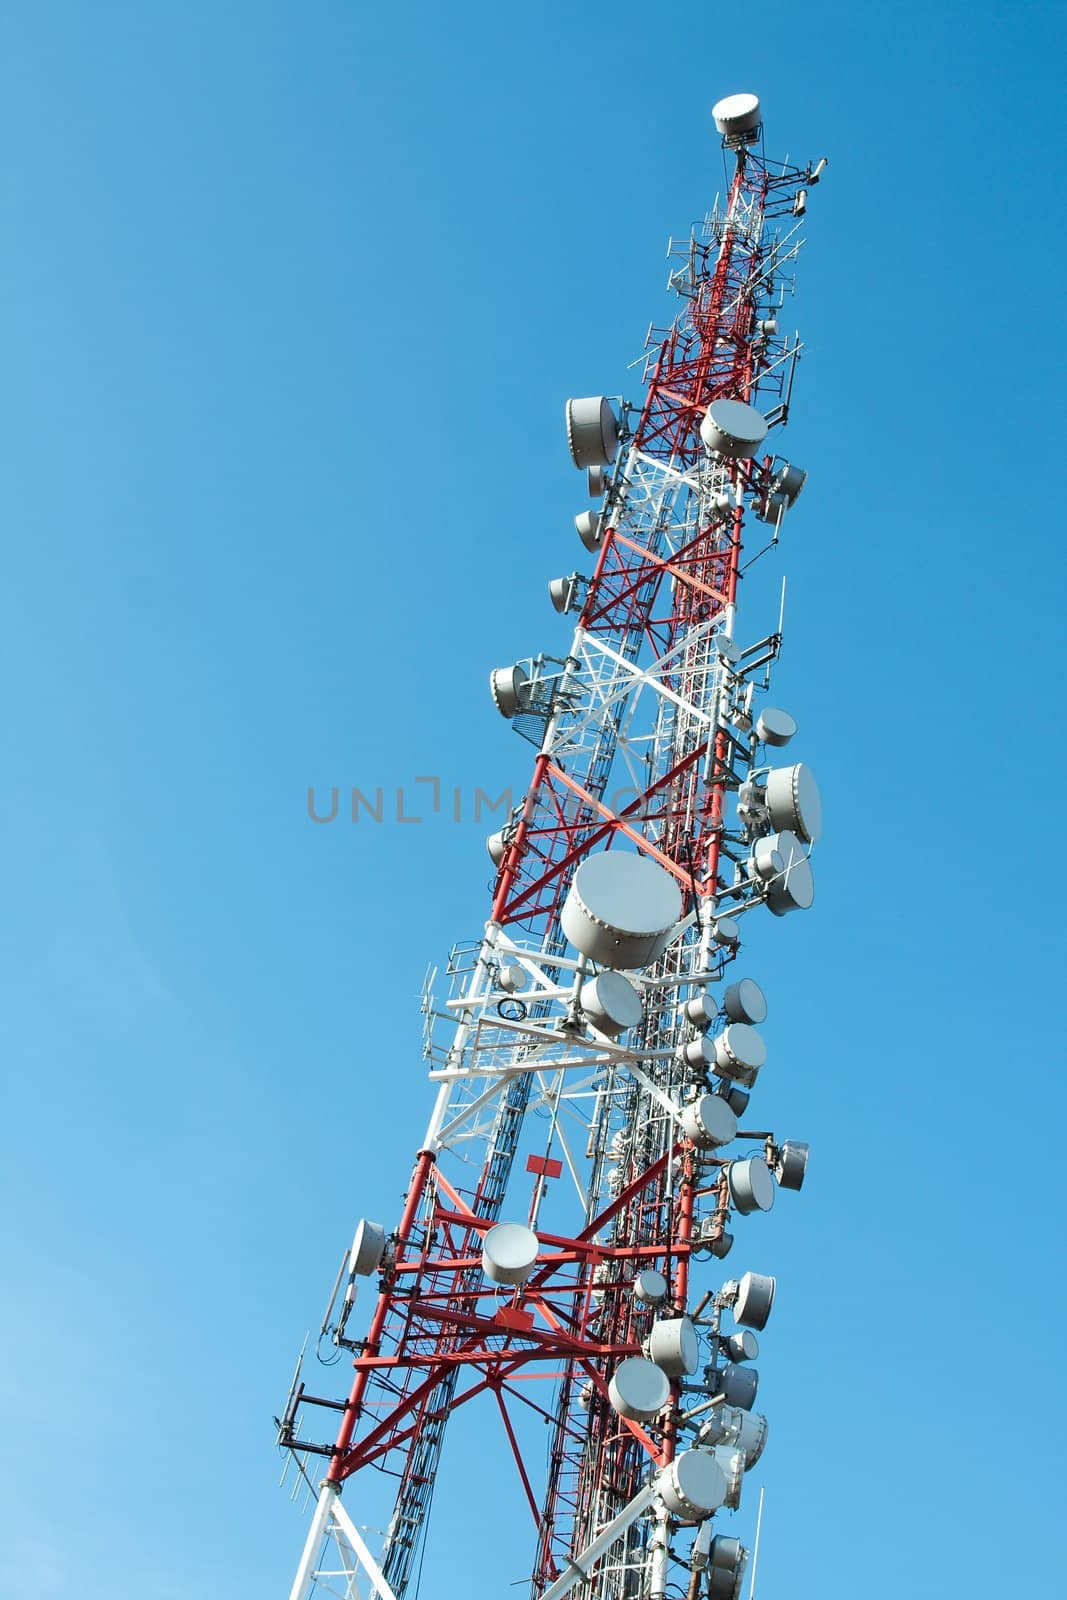 Communication transmitter tower against clear blue sky